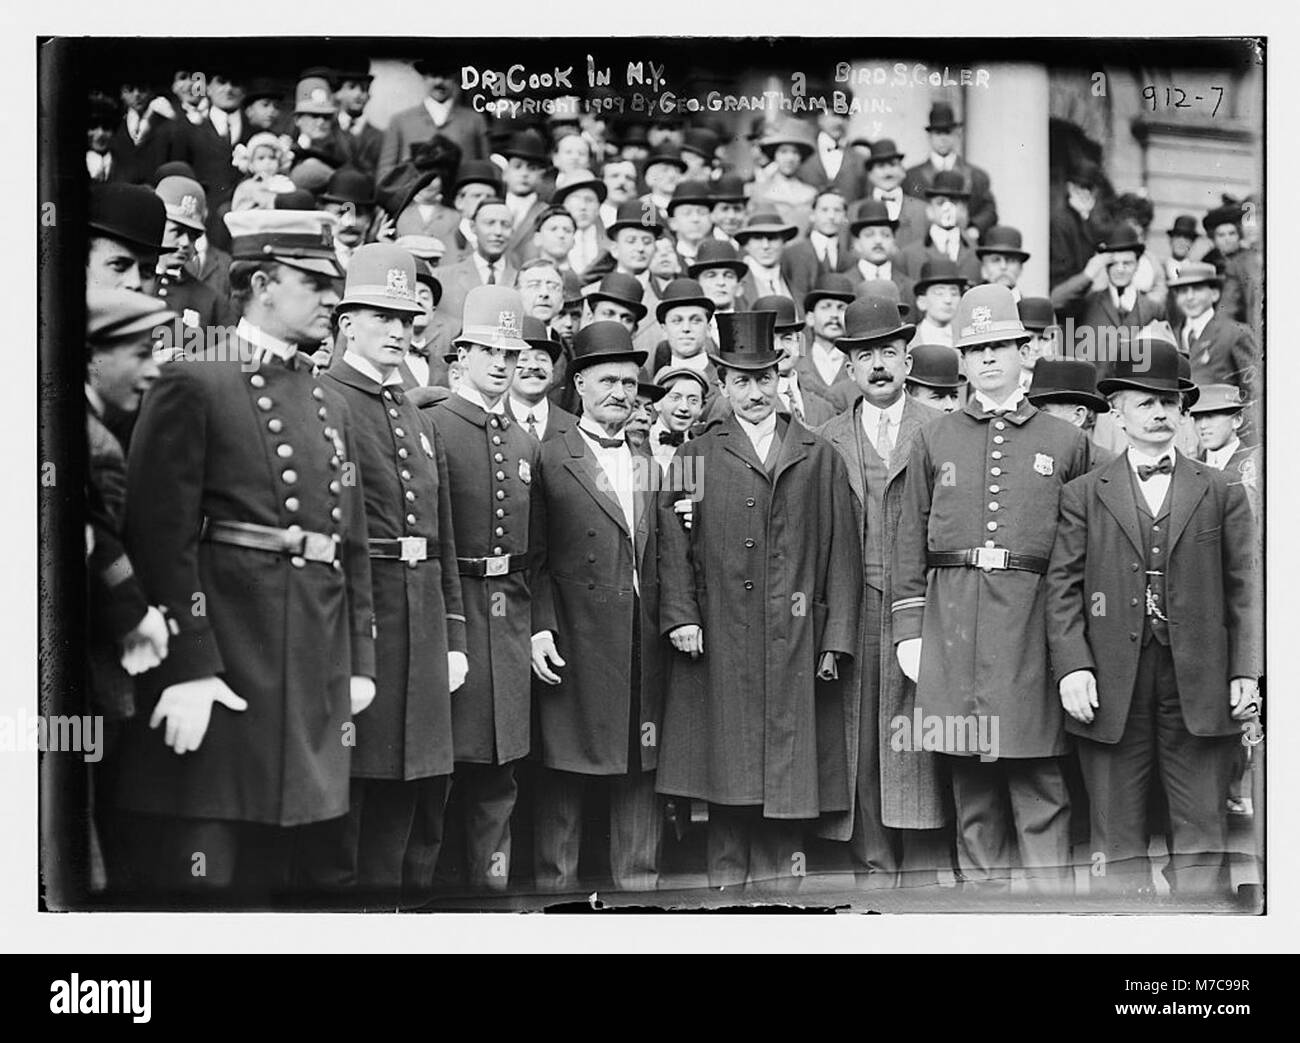 Dr. Cook, Bird S. Coler, police officers and others, New York LCCN2014684328 Stock Photo